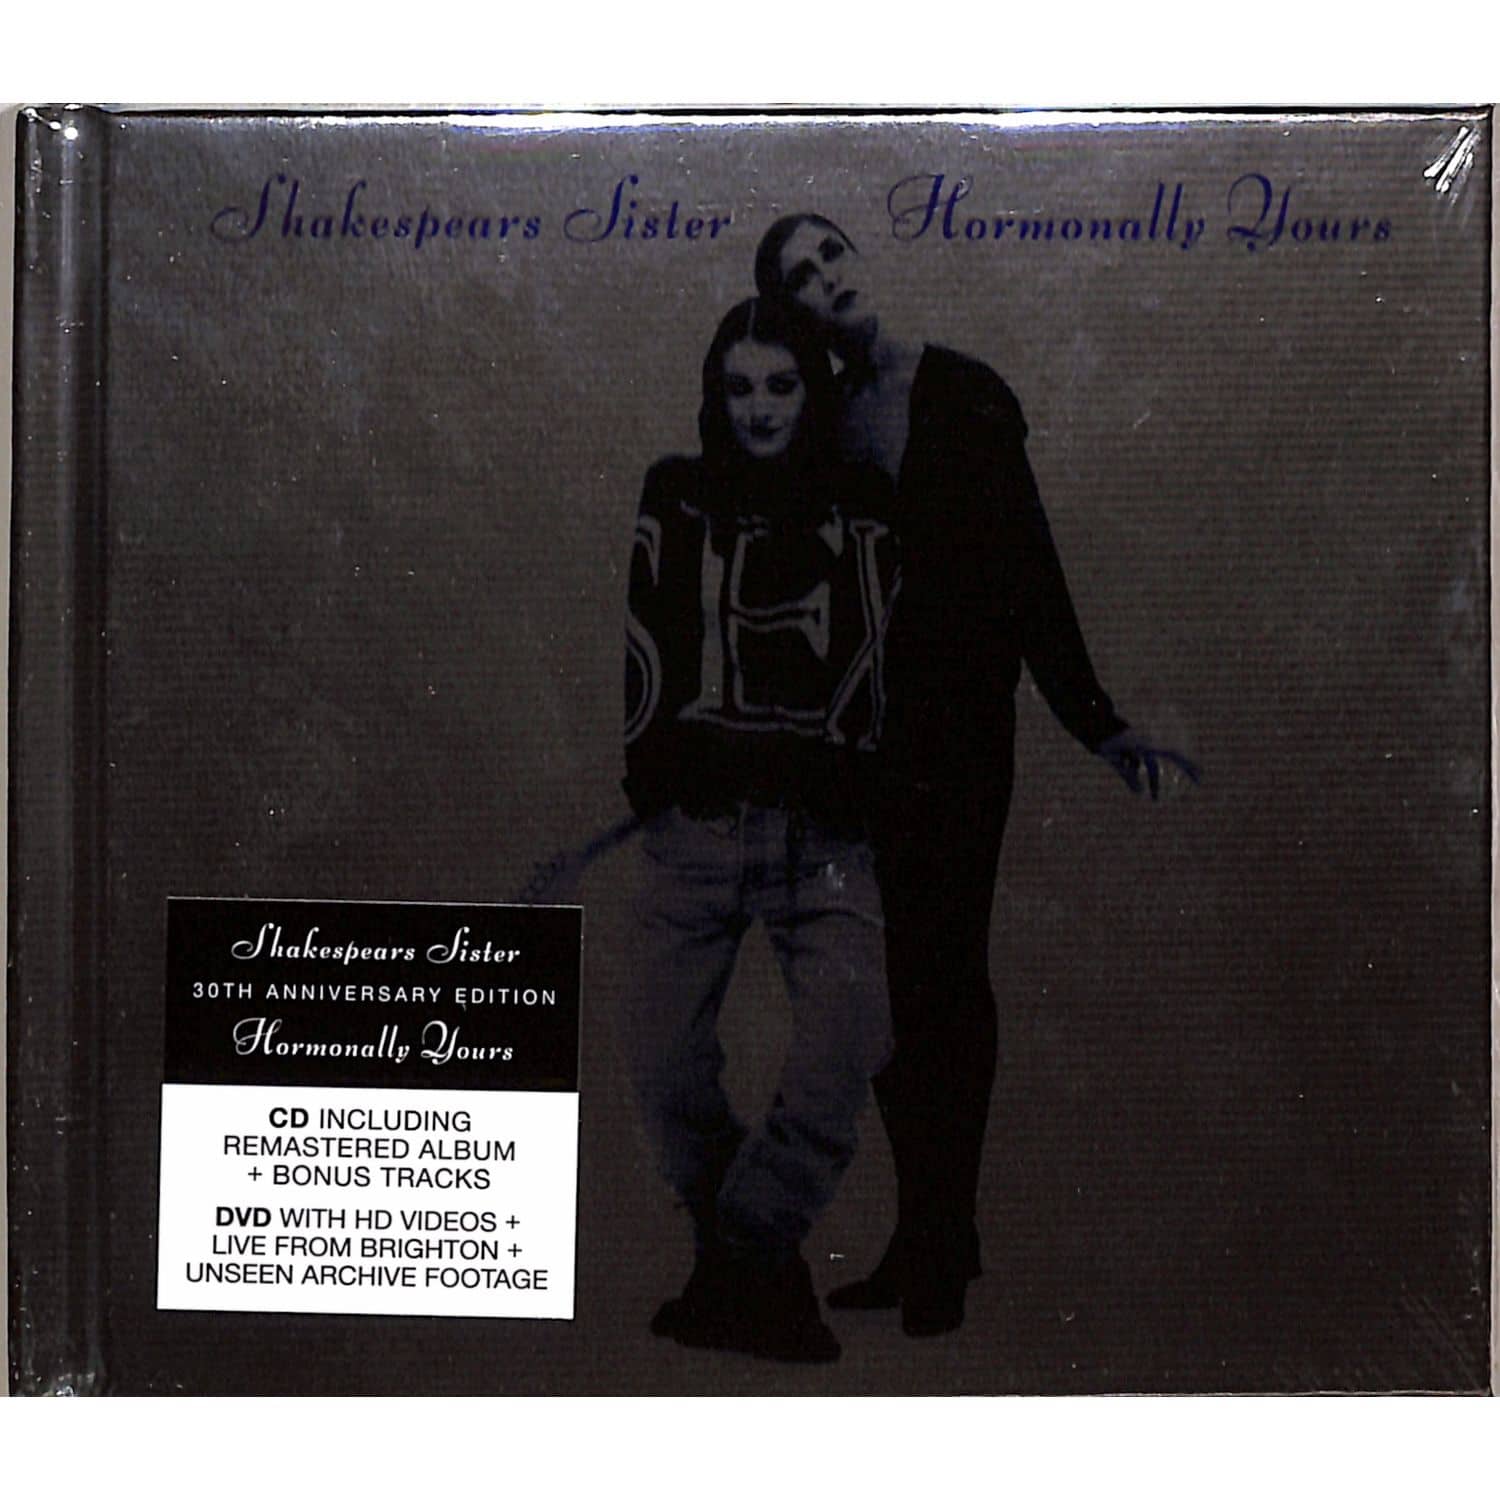 Shakespears Sister - HORMONALLY YOURS - 30TH ANNIVERSARY 